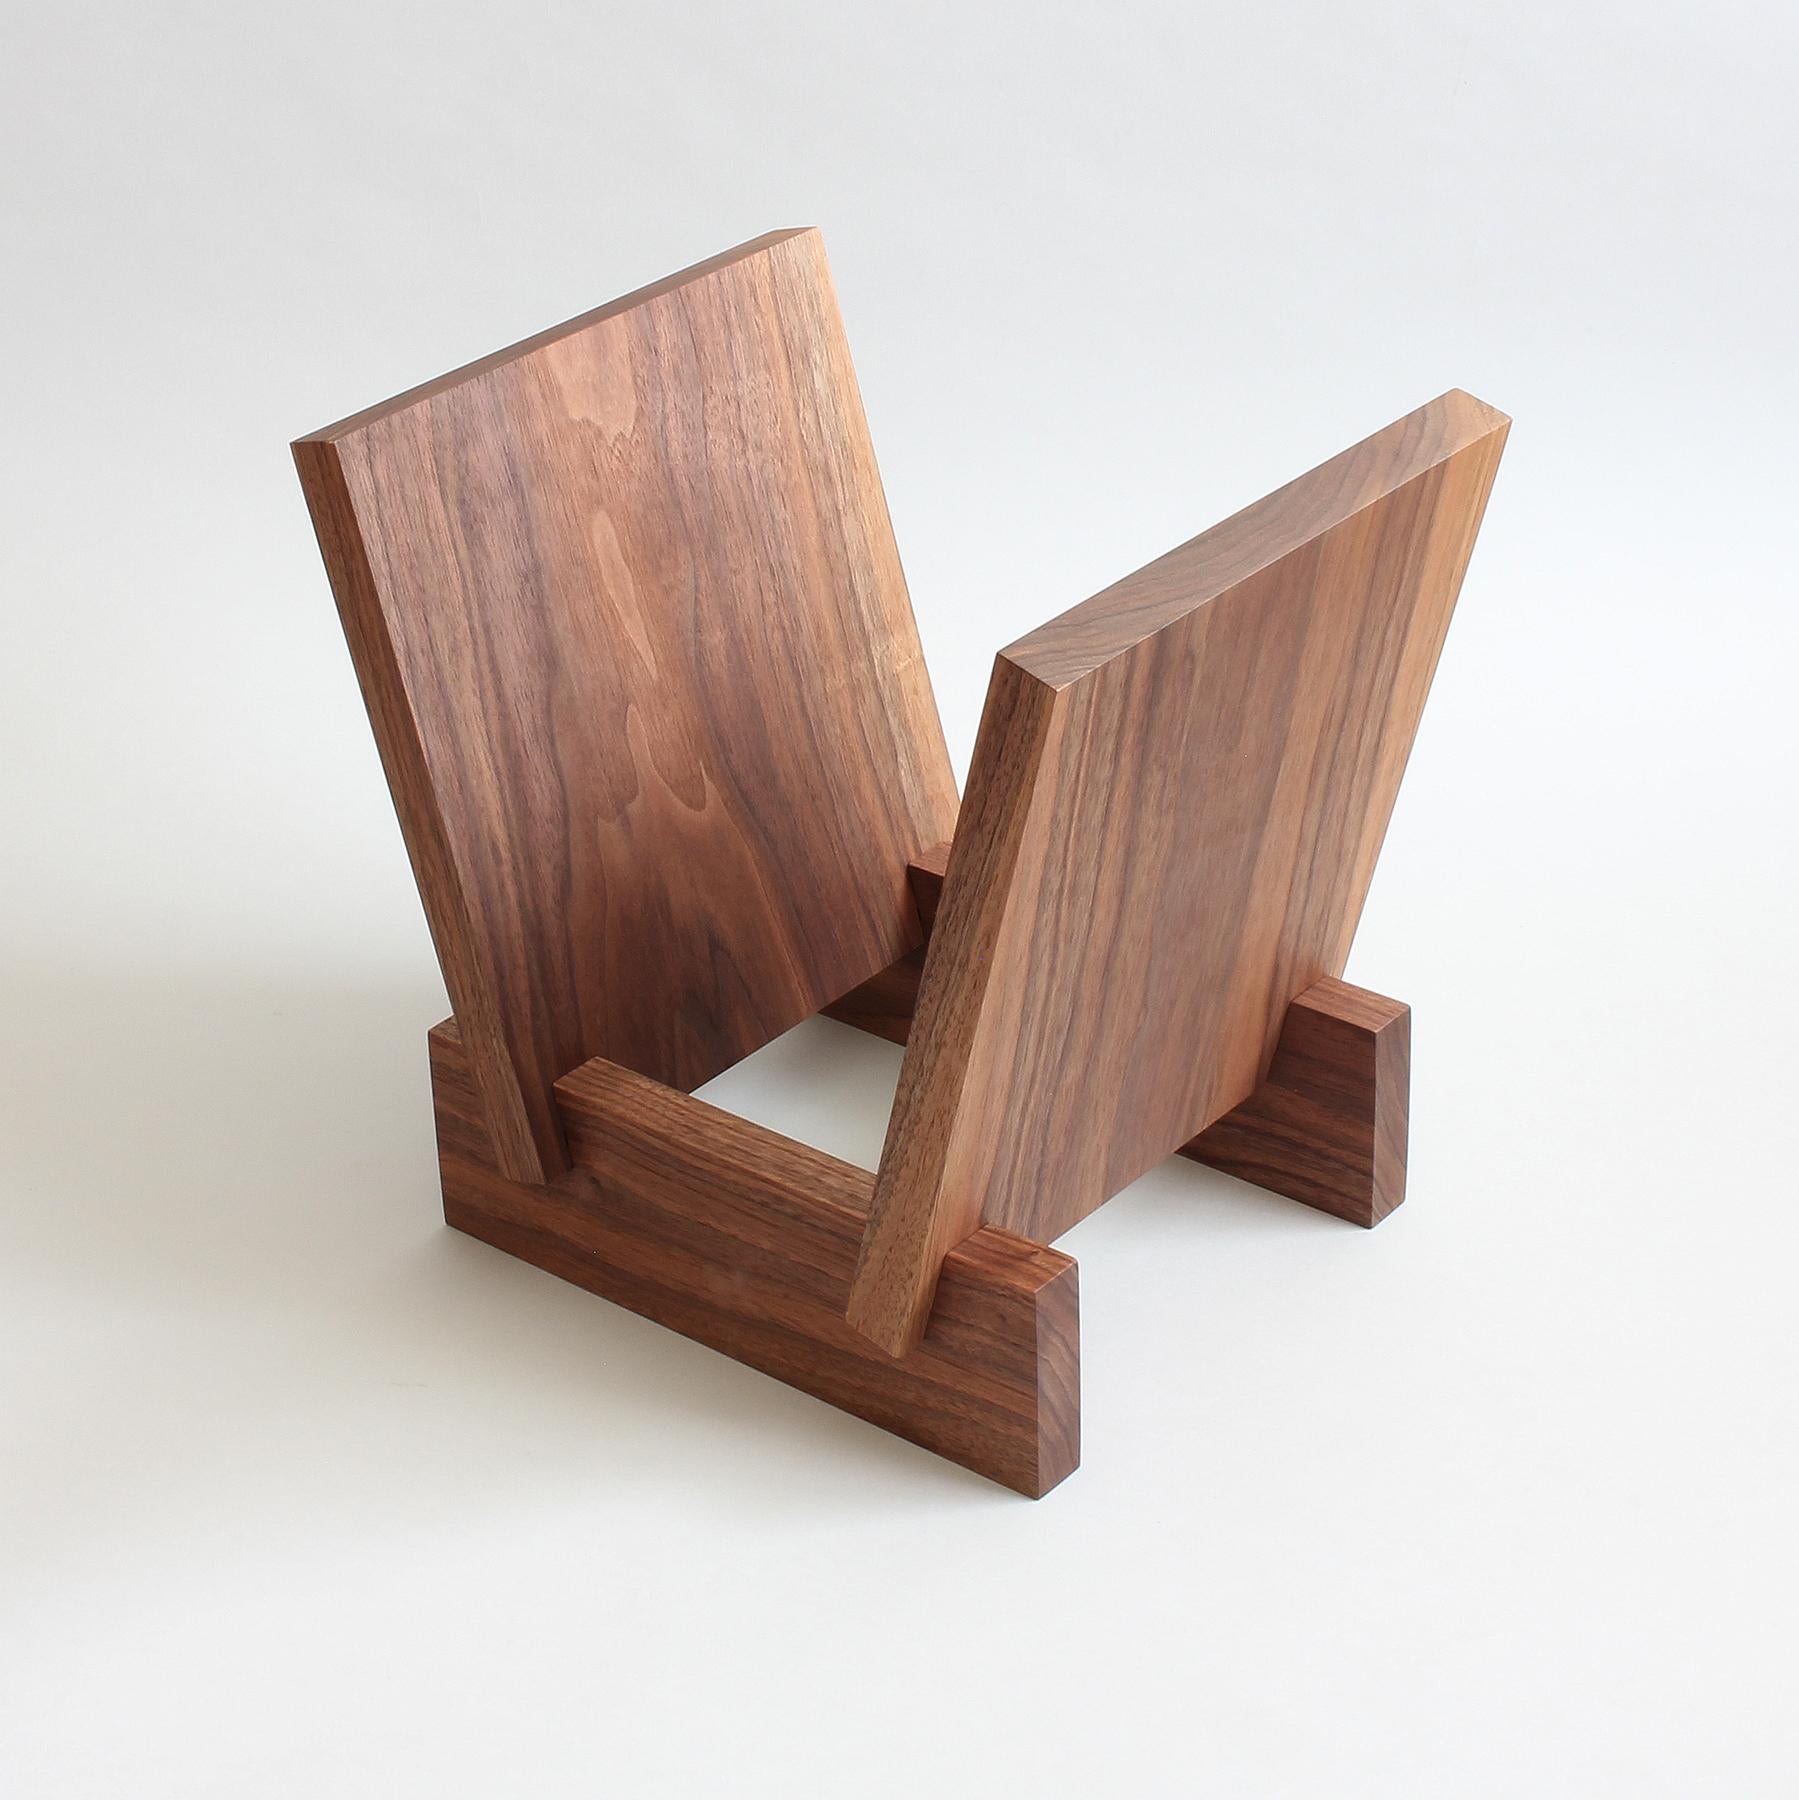 Hand-Crafted Record Stand in Solid Walnut by Elliott Marks For Sale